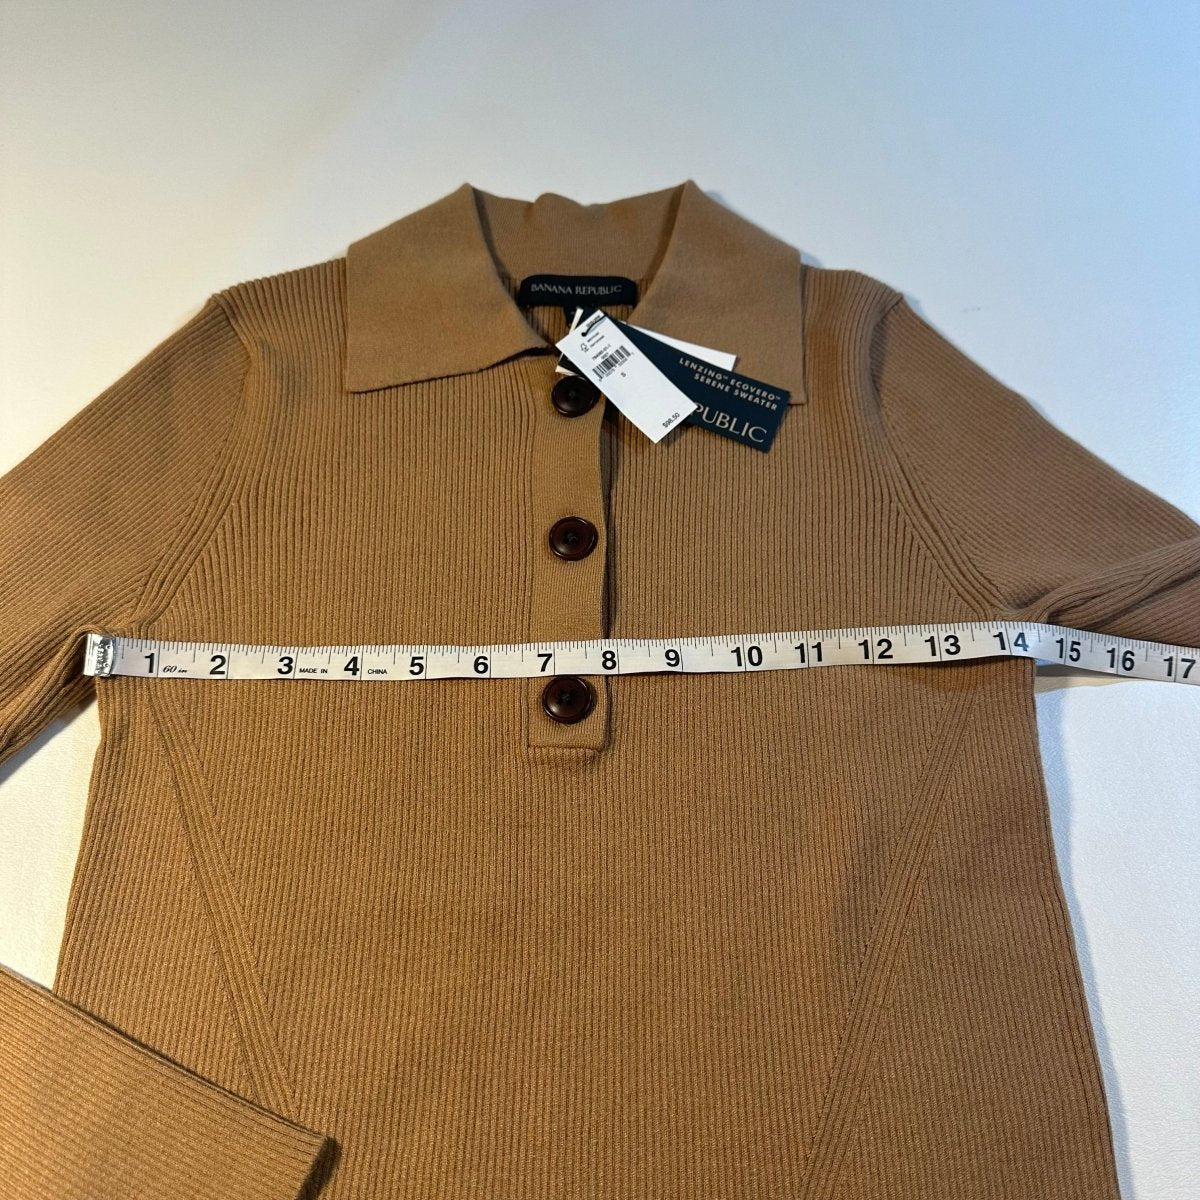 Banana Republic - NWT Banana Republic Size S Chase Ribbed Collared Button Up Polo Sweater In Camel - Sweaters - Afterglow Market